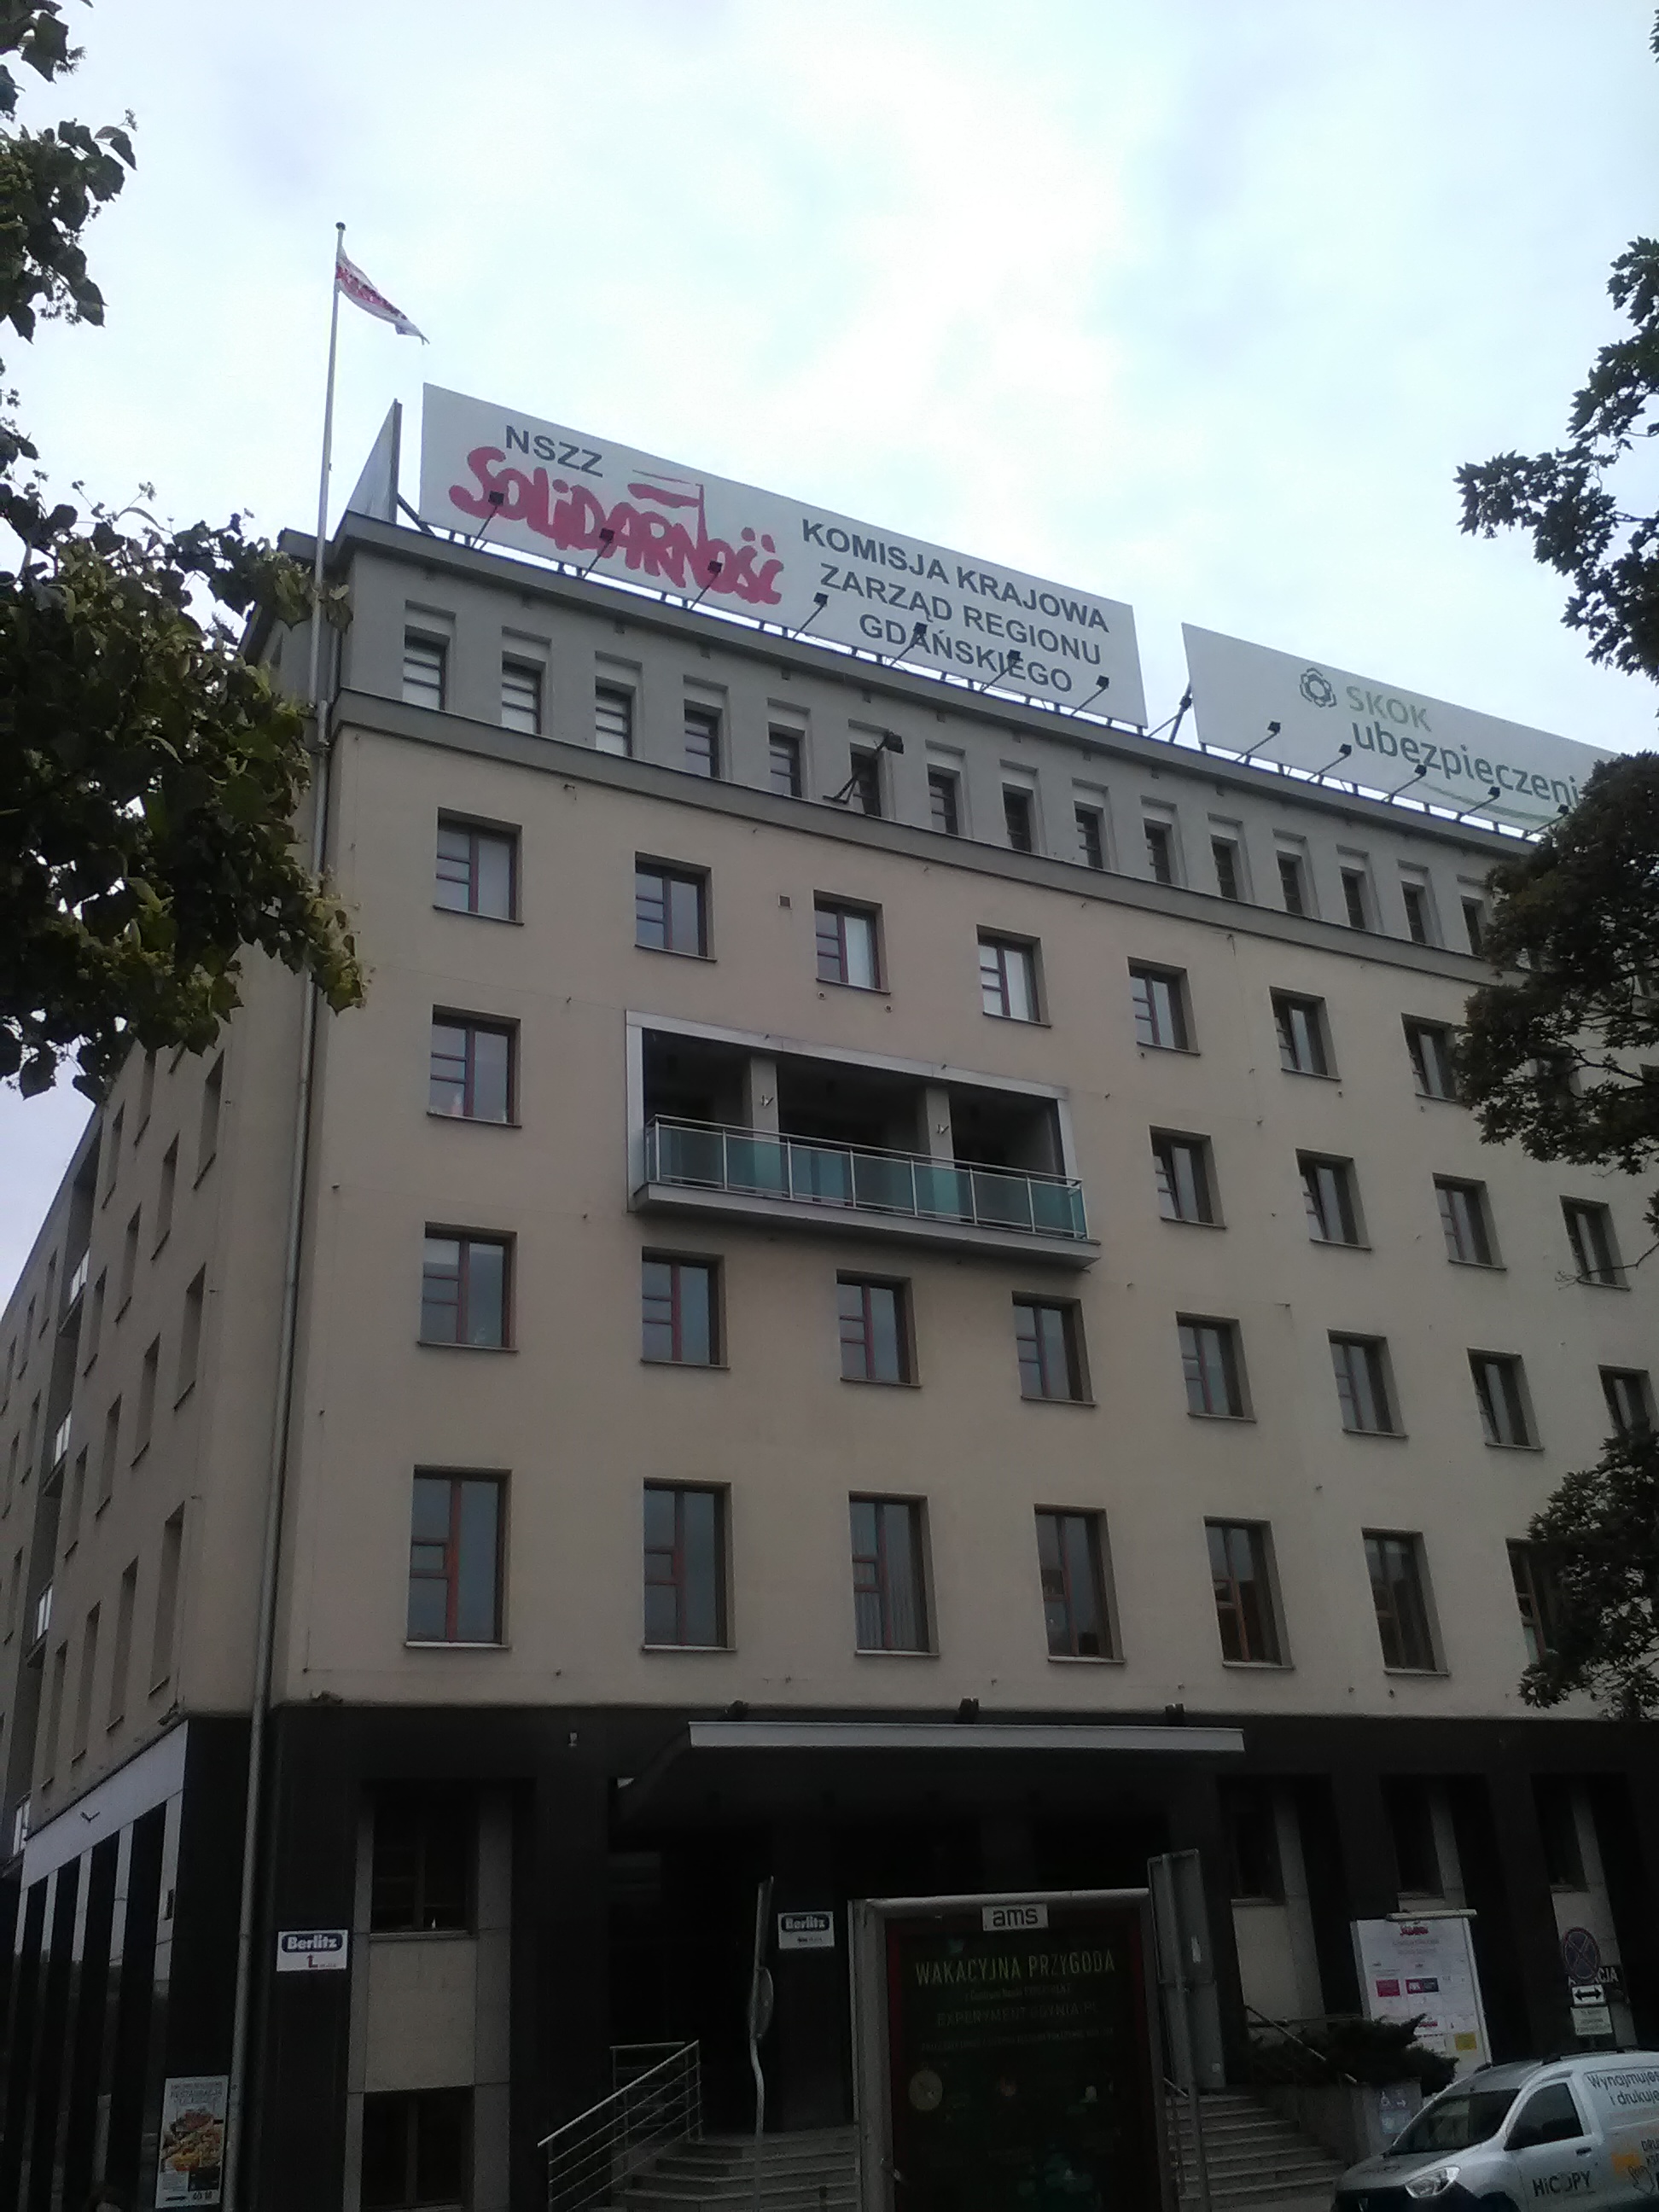 The building of the National Commission of Solidarność Trade Union in Gdańsk, Poland. View from the outside. 